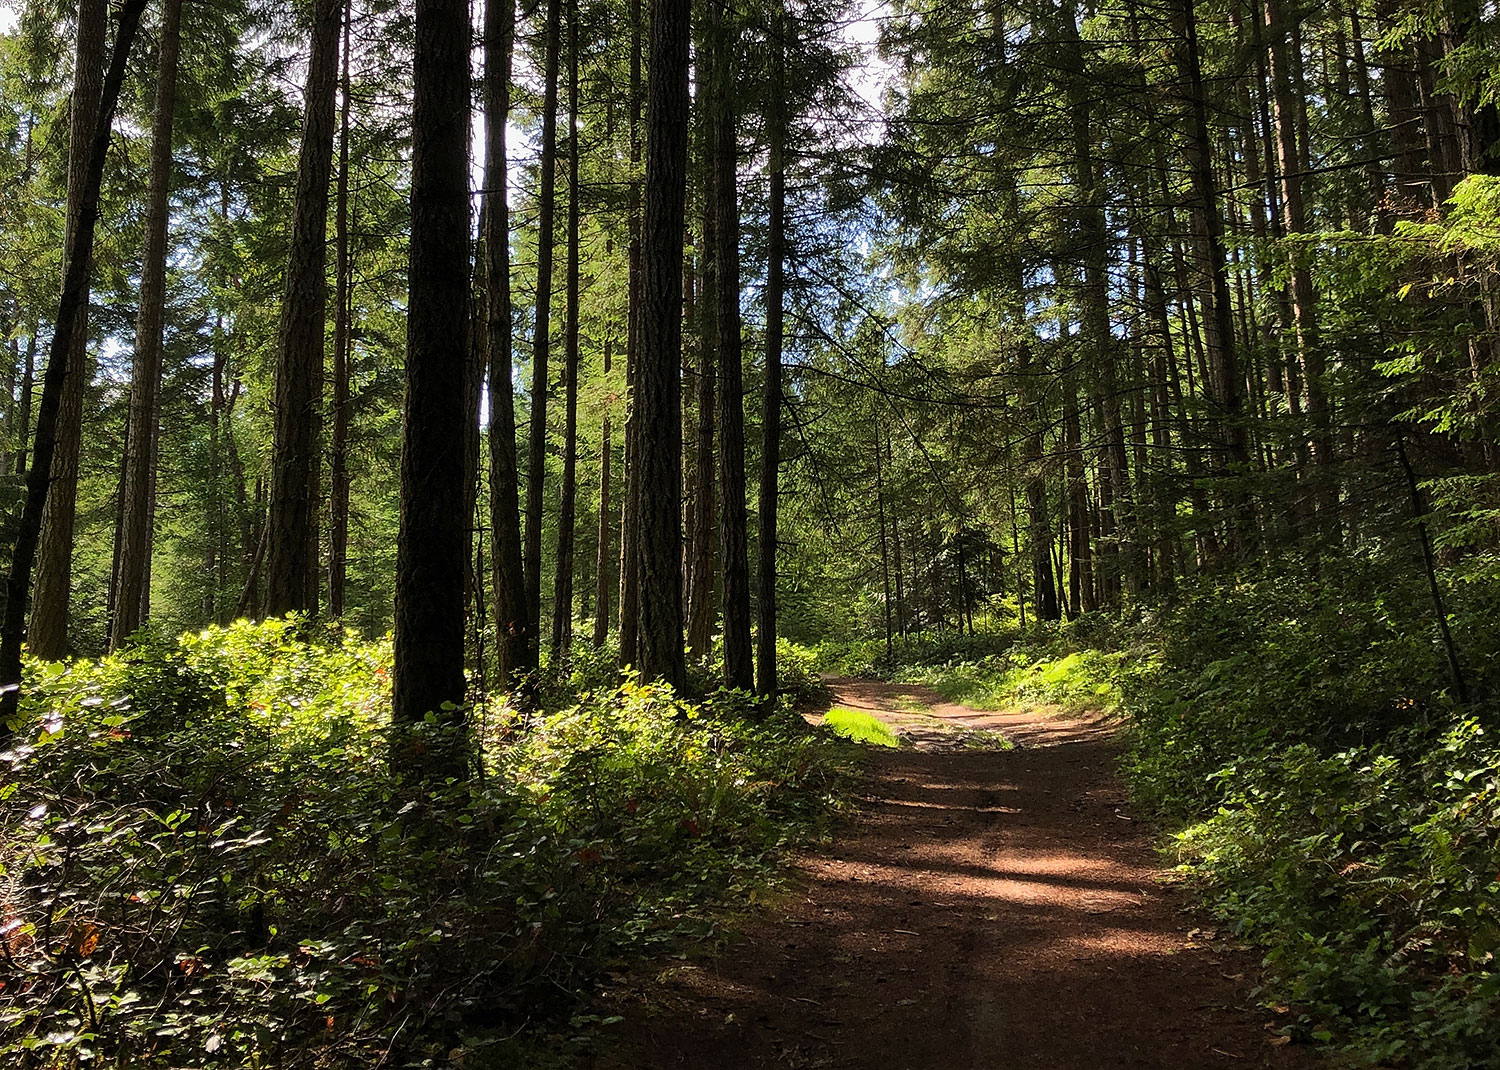 A photo of a wide trail with sunlight falling through the trees.